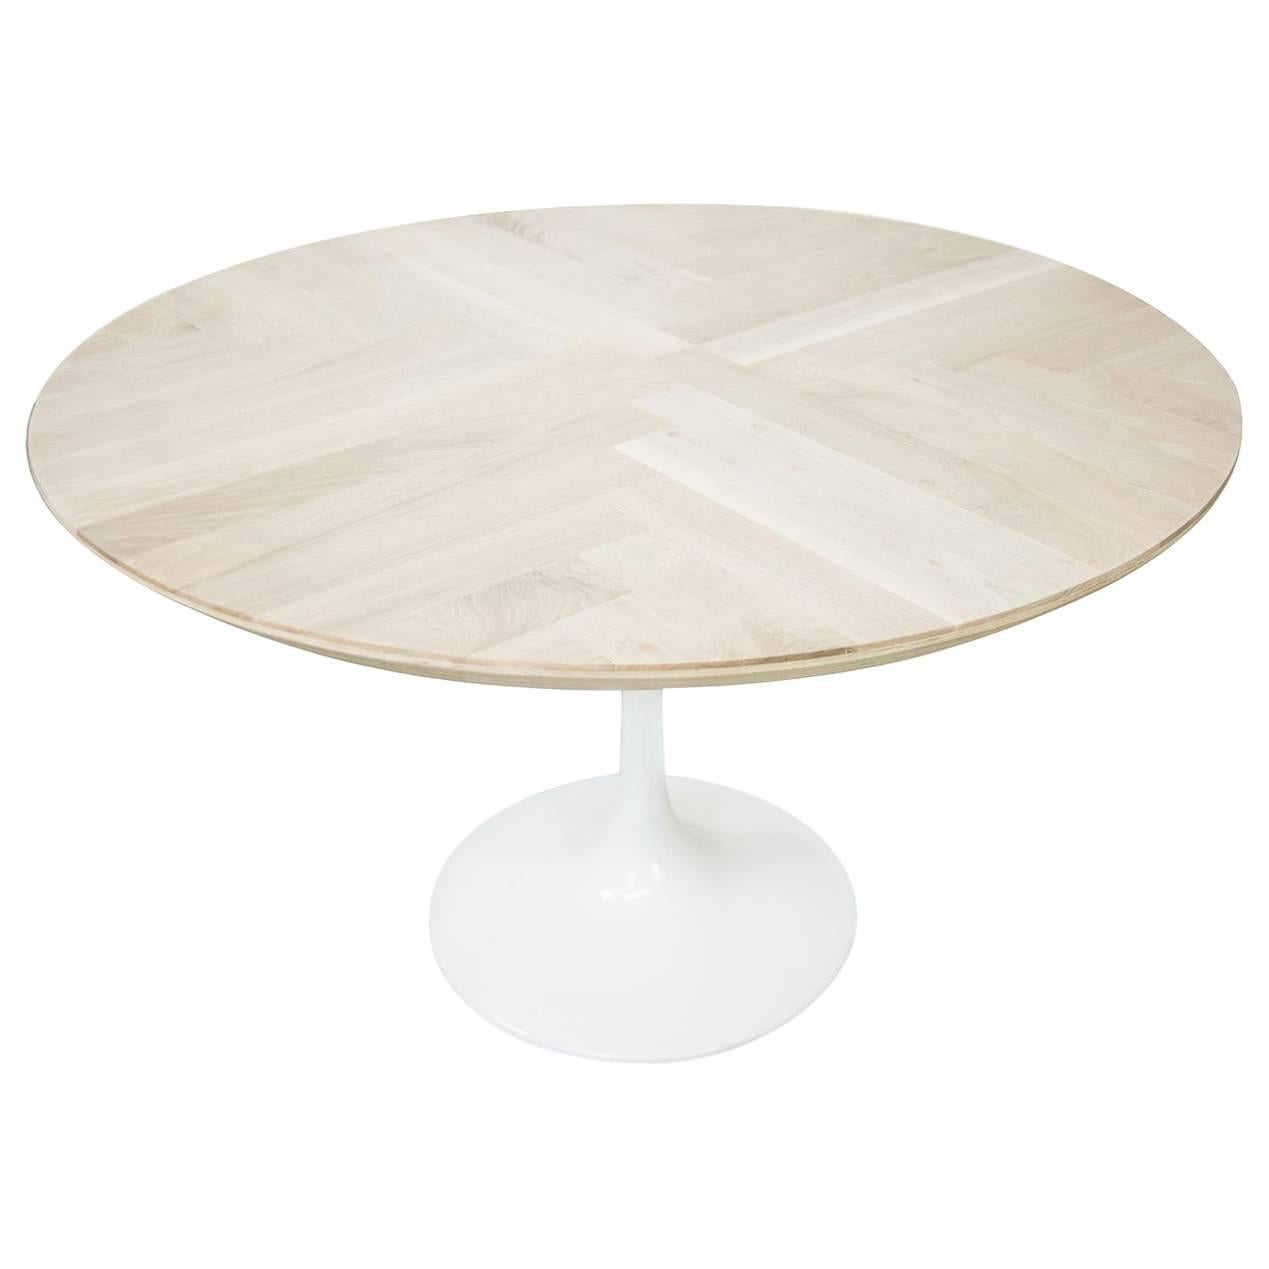 Modern Round Dining Table Herringbone Pattern Bleached Walnut Top and White Base